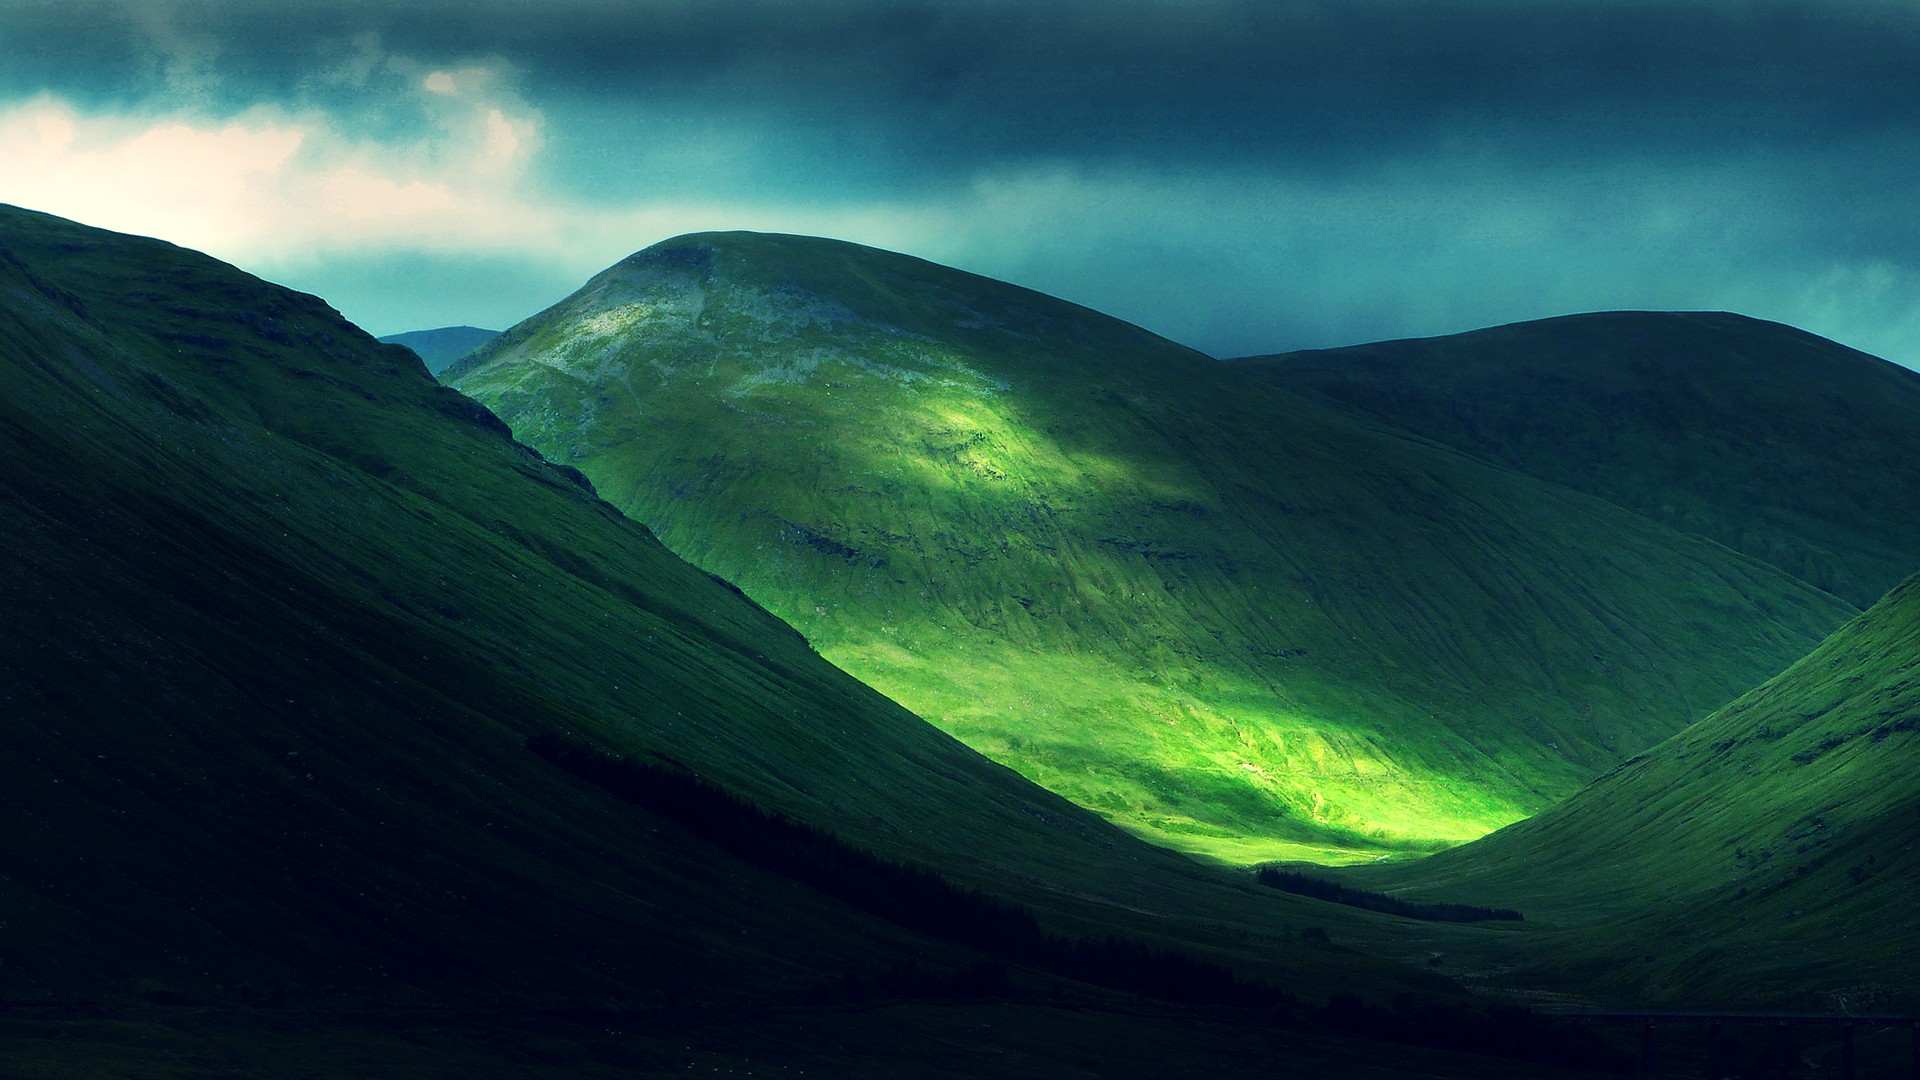 Hill 4K Ultra HD Wallpapers, HD Hill 3840x2160 Backgrounds, Free Images  Download